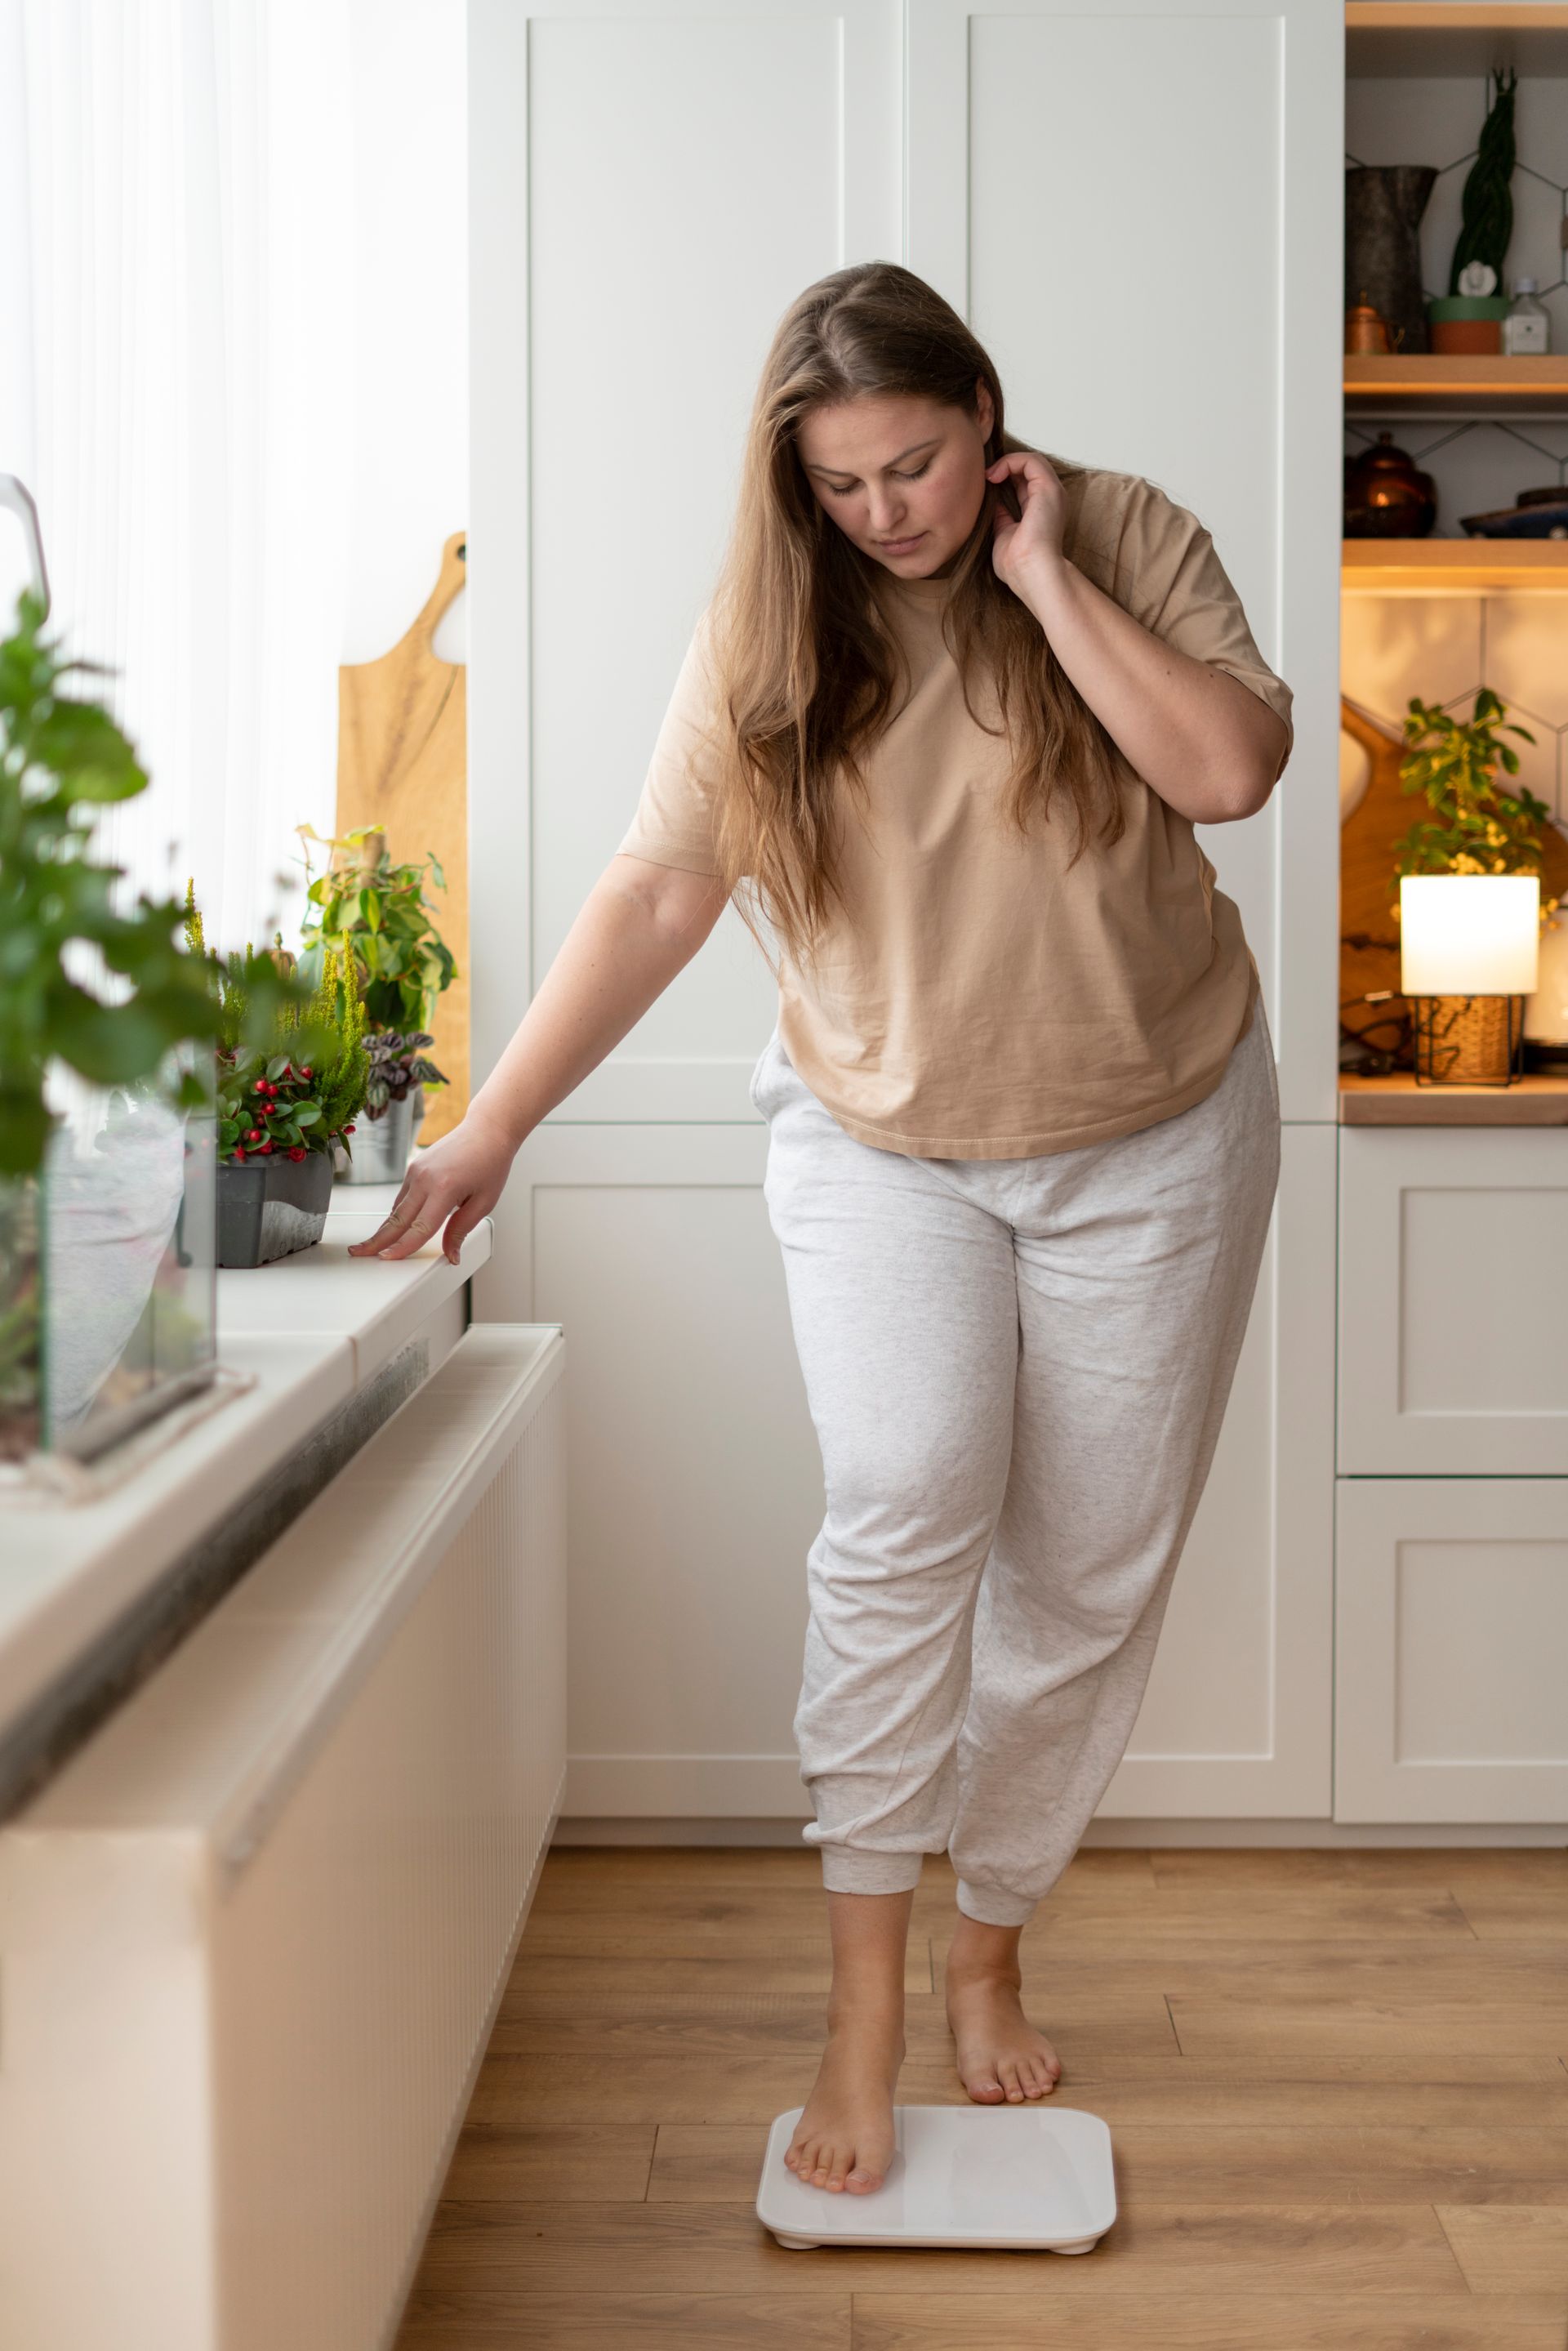 person weighing themselves on scale in kitchen